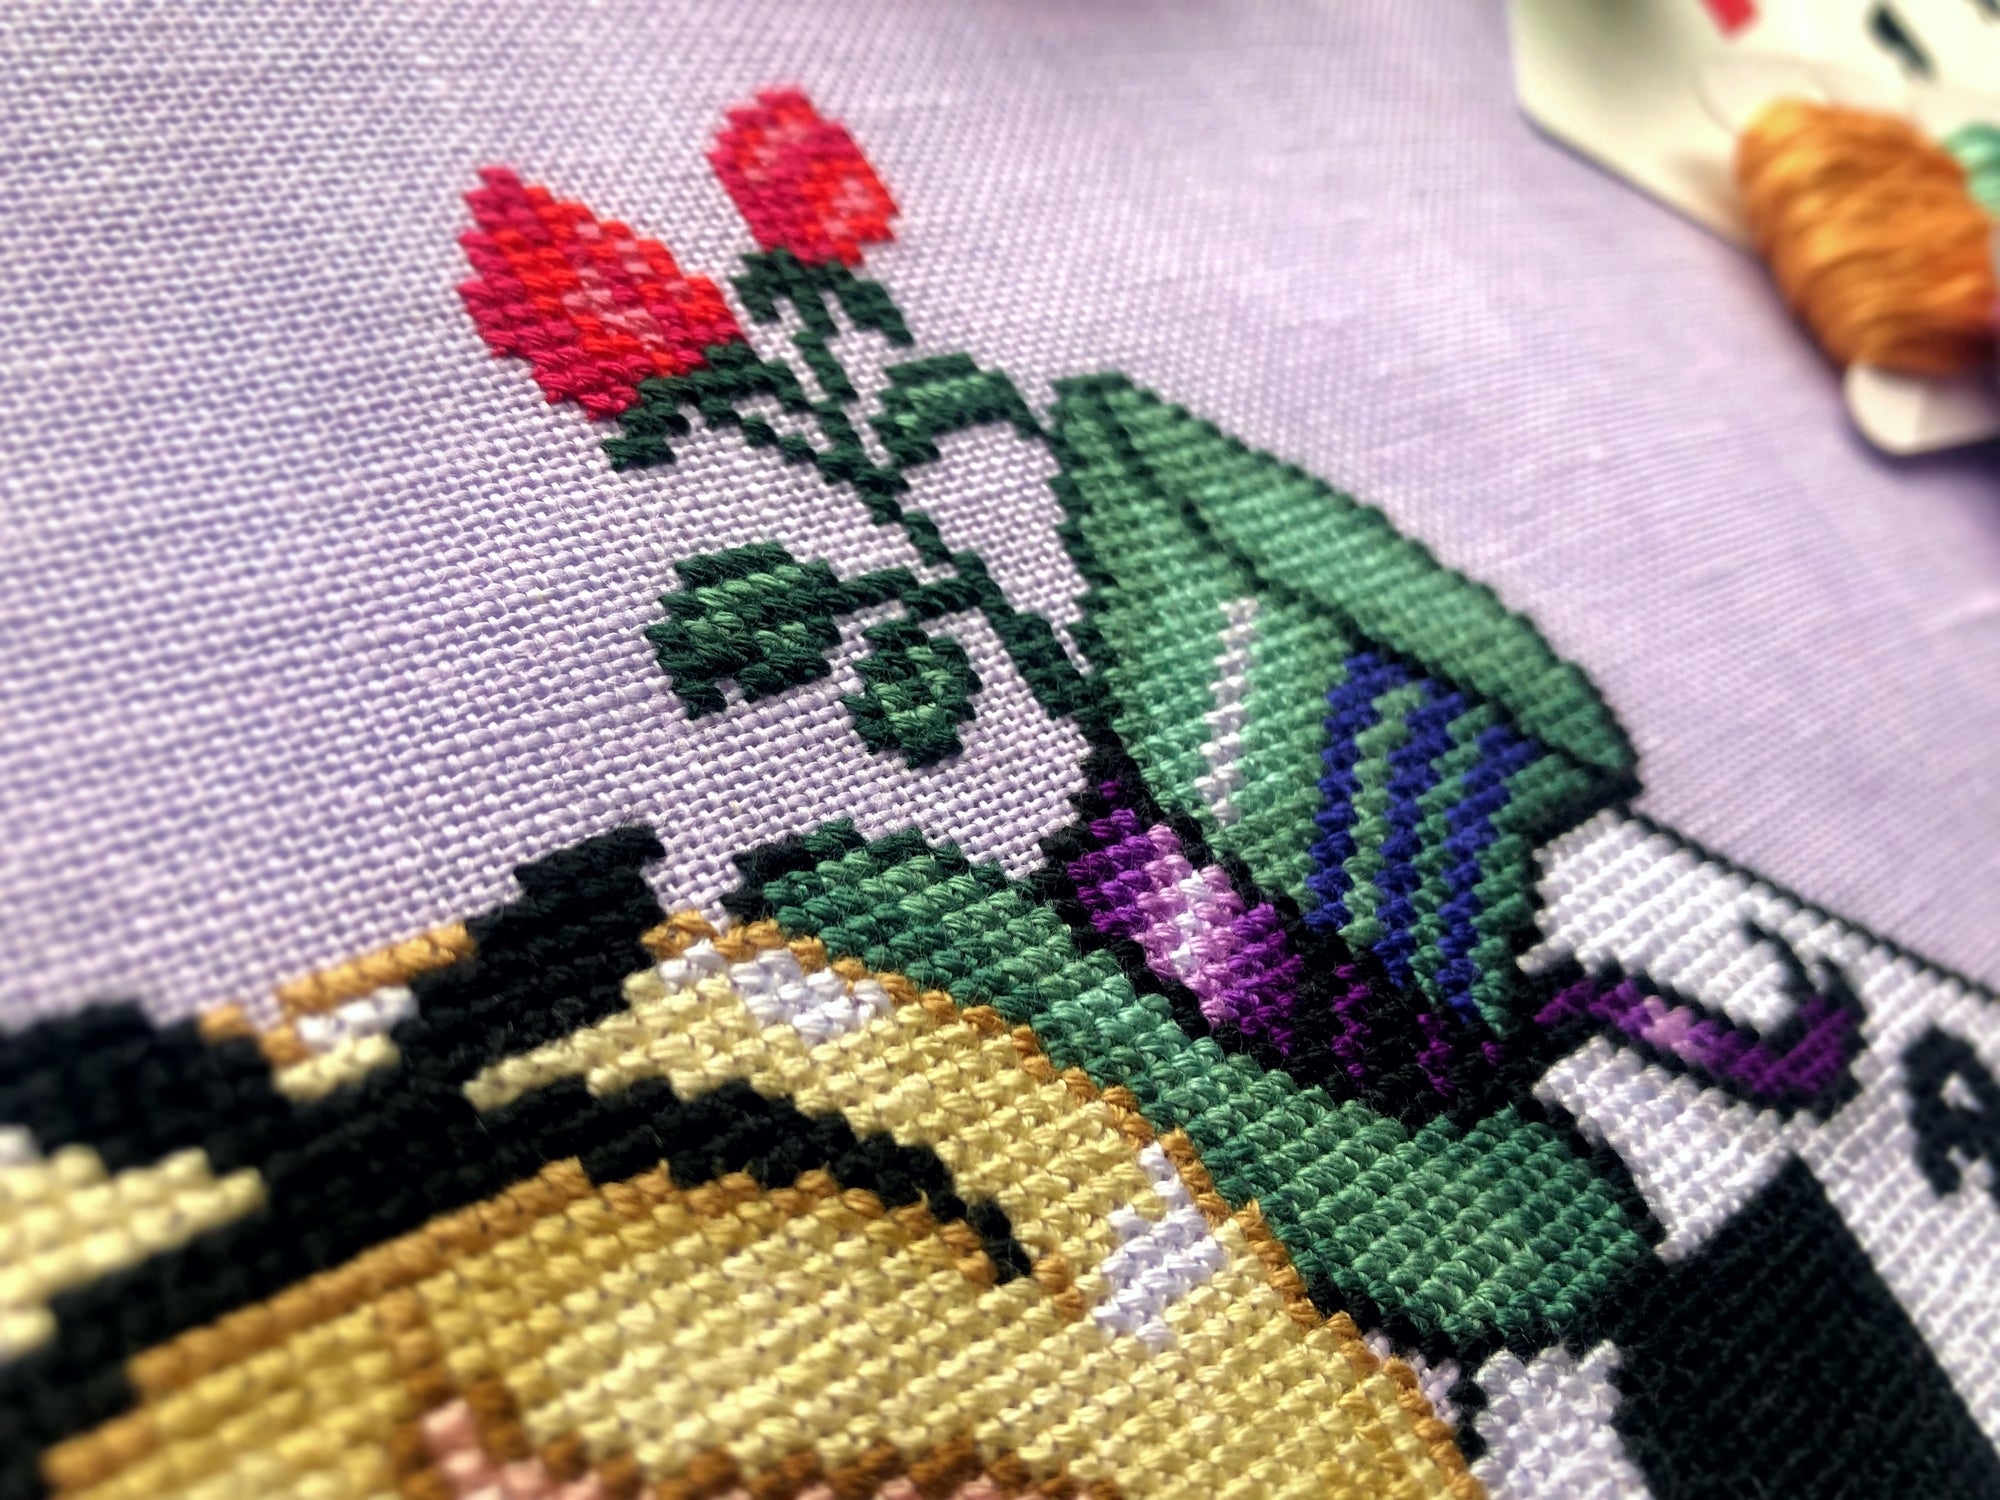 Closeup of top right side of cross stitch pattern. Here the hat of the Mad Hatter is visible. It is tall and green with blue markings, and with a purple ribbon wrapped around it. Behind it are more red roses.